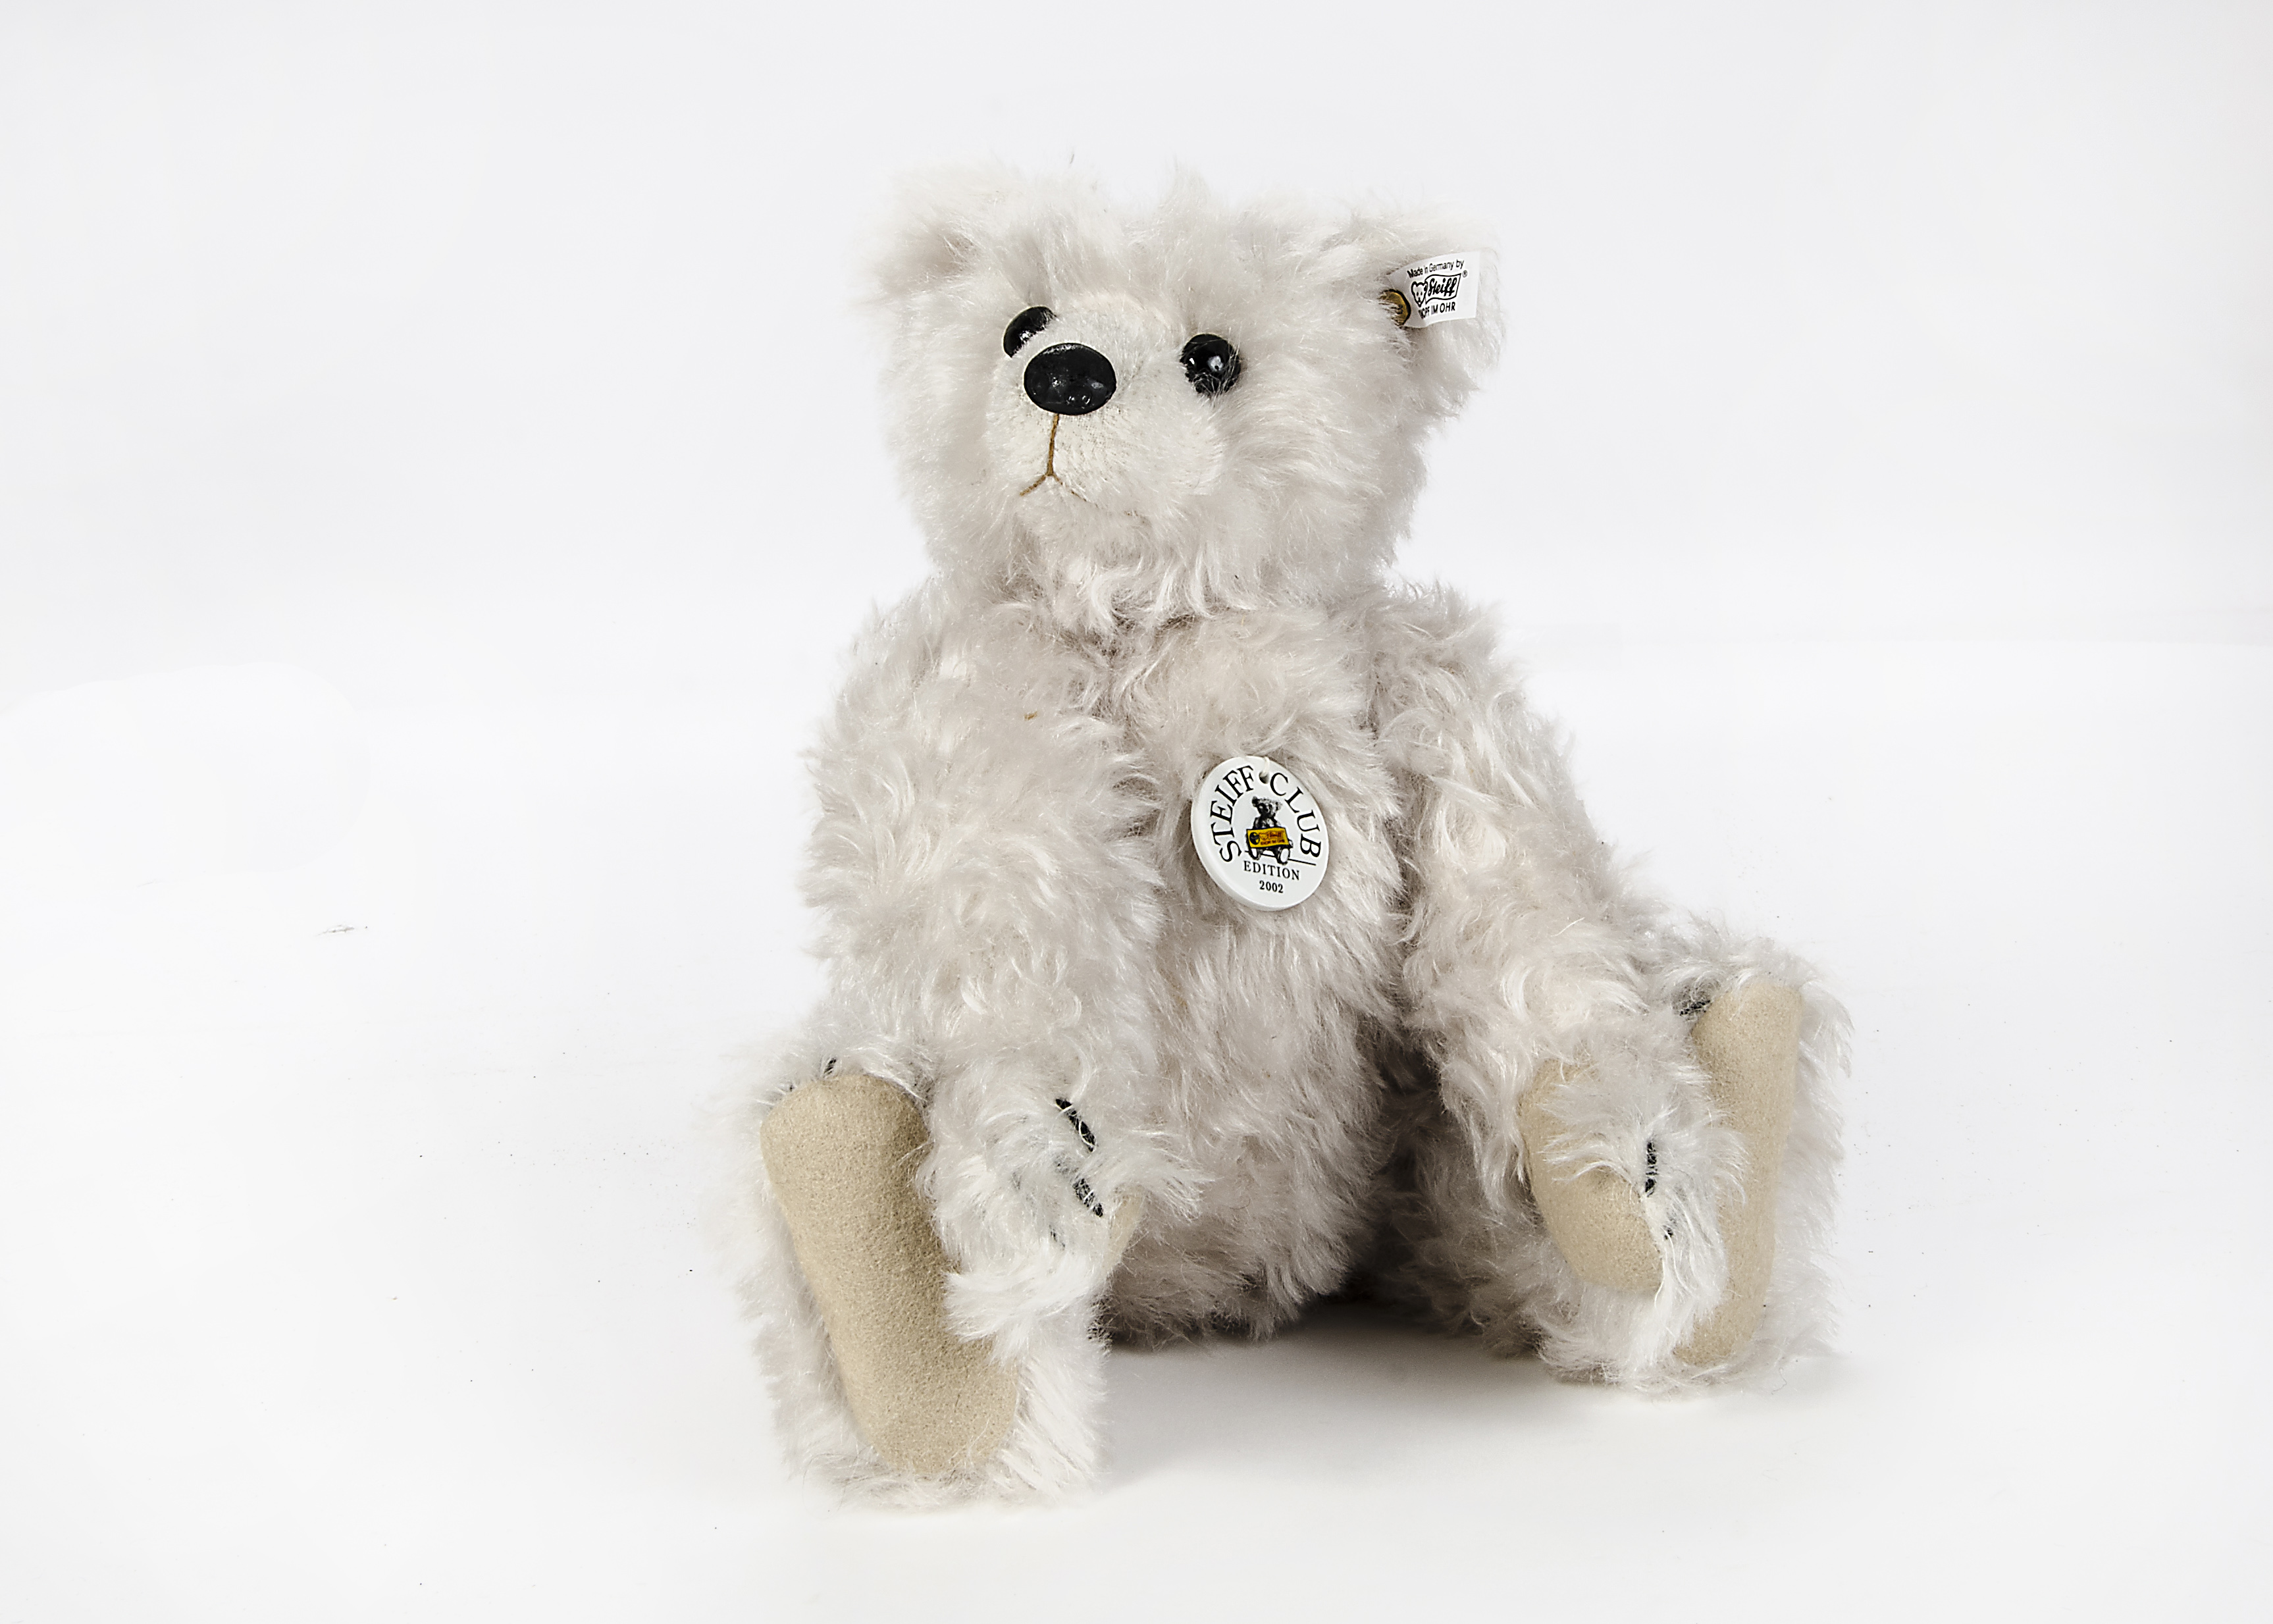 A Steiff Limited Club Edition white Bear 28 PB, in original box with certificate, 1857 for 2002 -